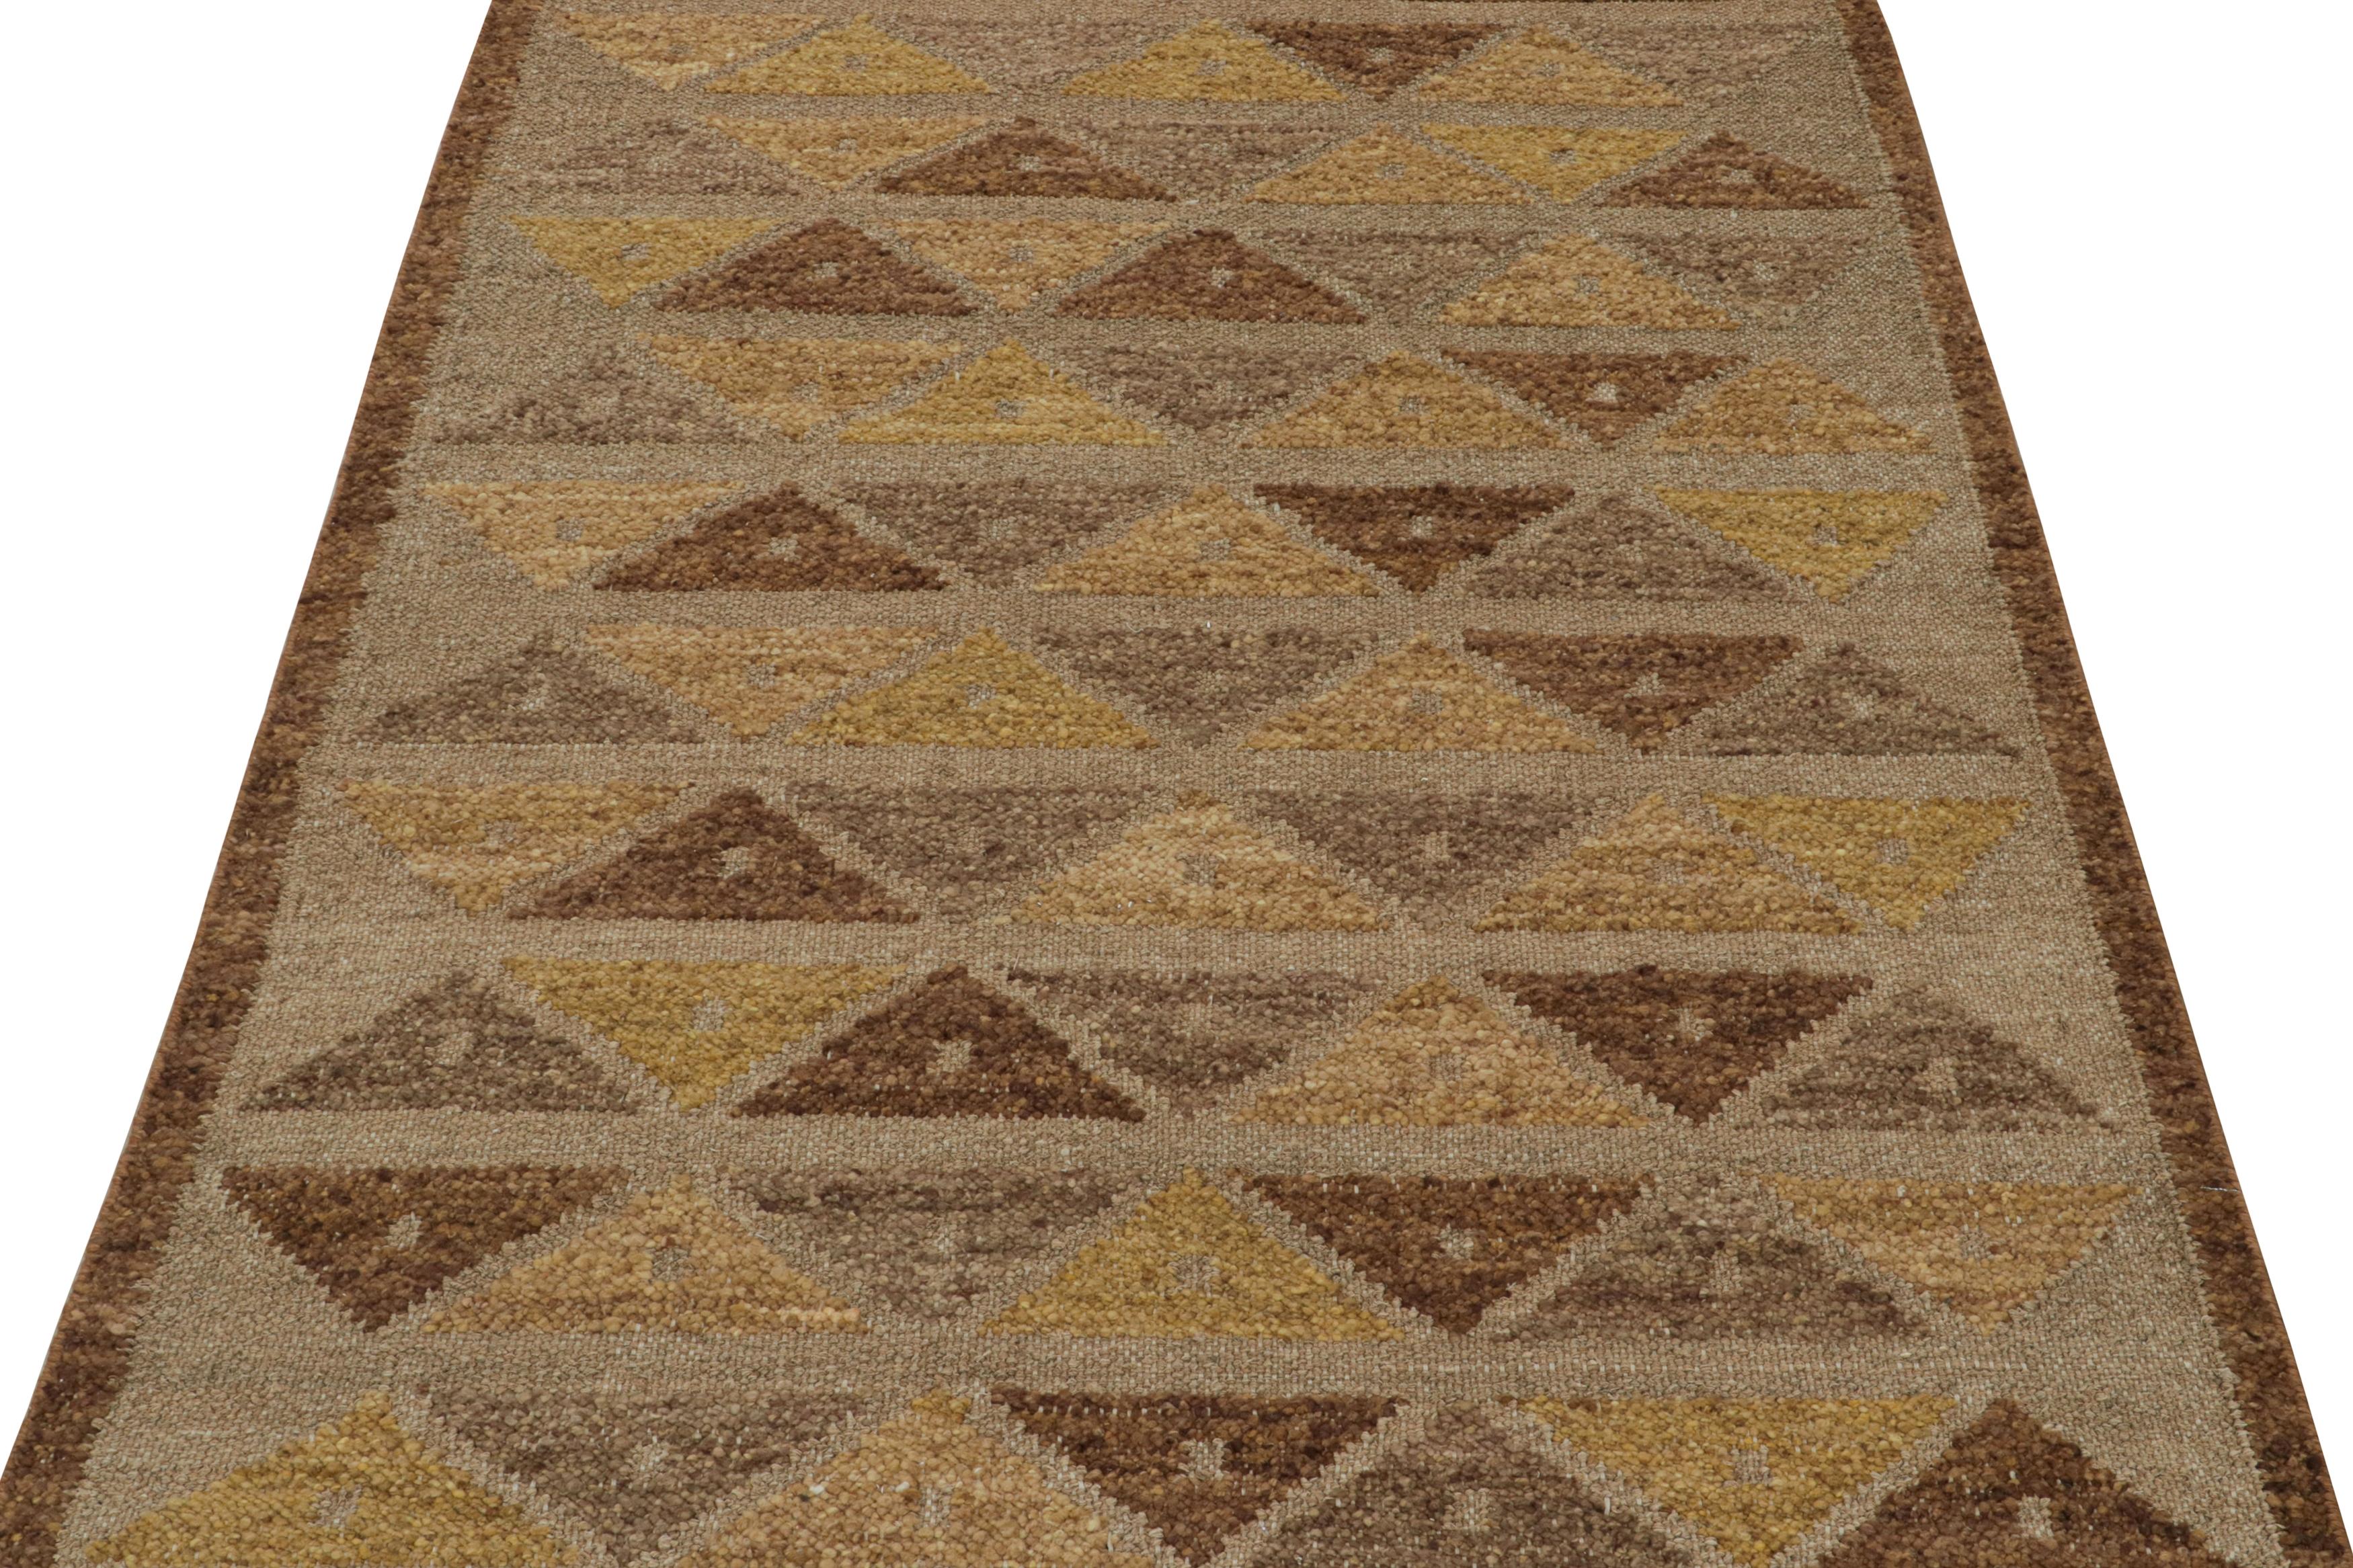 Rug & Kilim’s Scandinavian Style Kilim with Brown & Gold Geometric Patterns In New Condition For Sale In Long Island City, NY